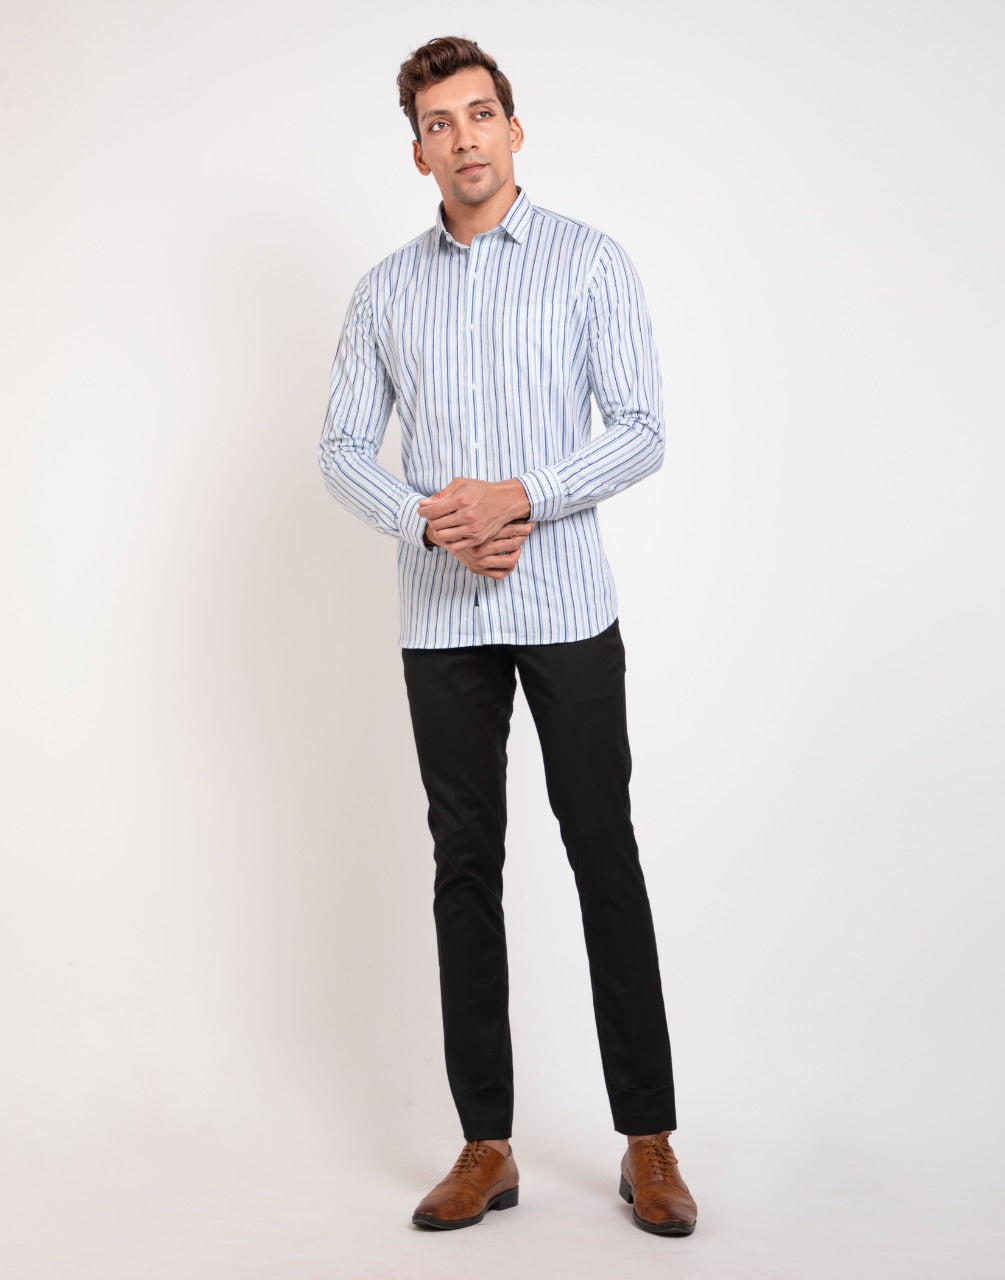 White & blue stripes lining casual wear shirt